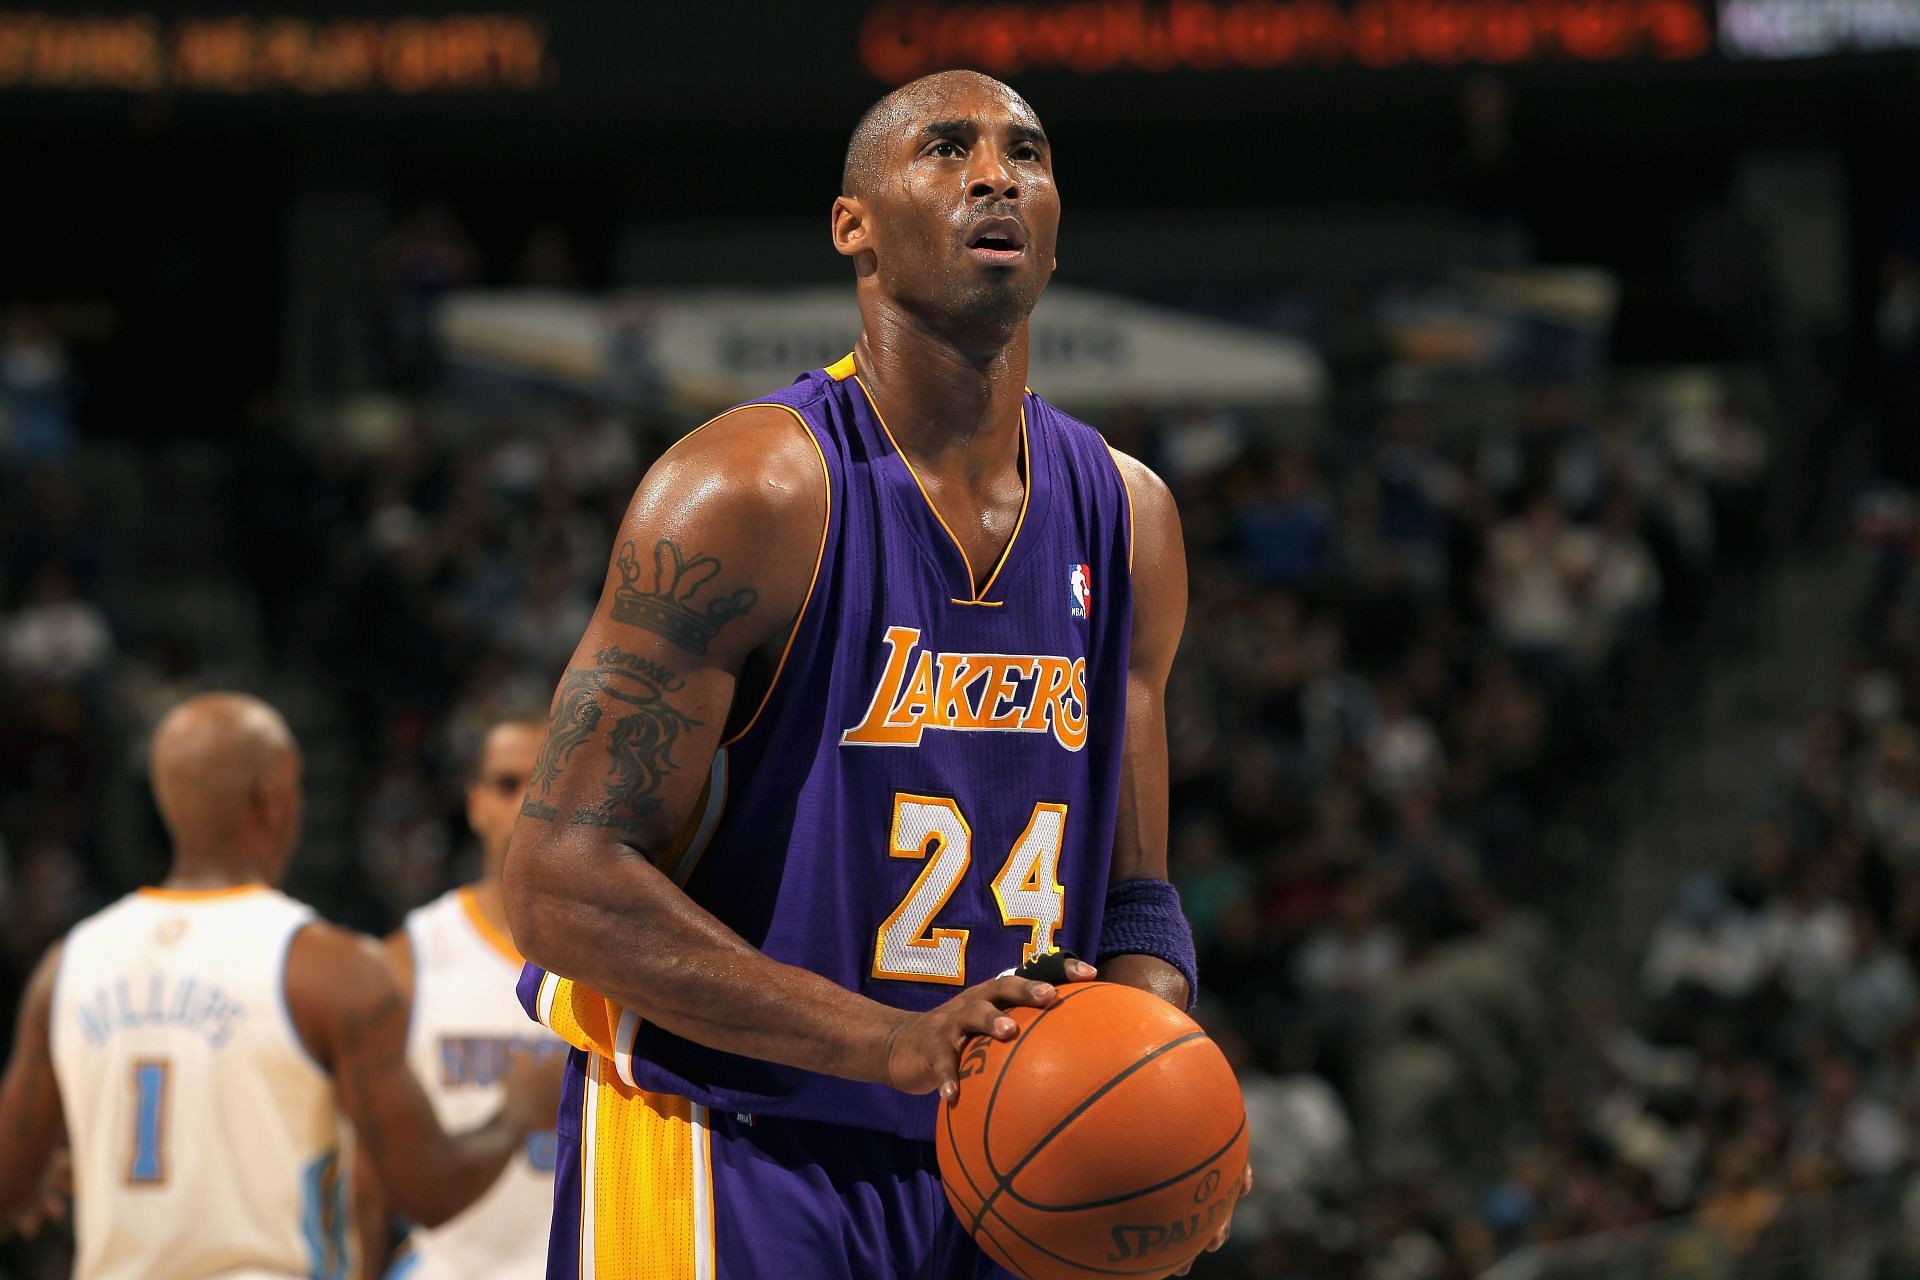 Kobe Bryant scores 44 points in Lakers' loss to Warriors